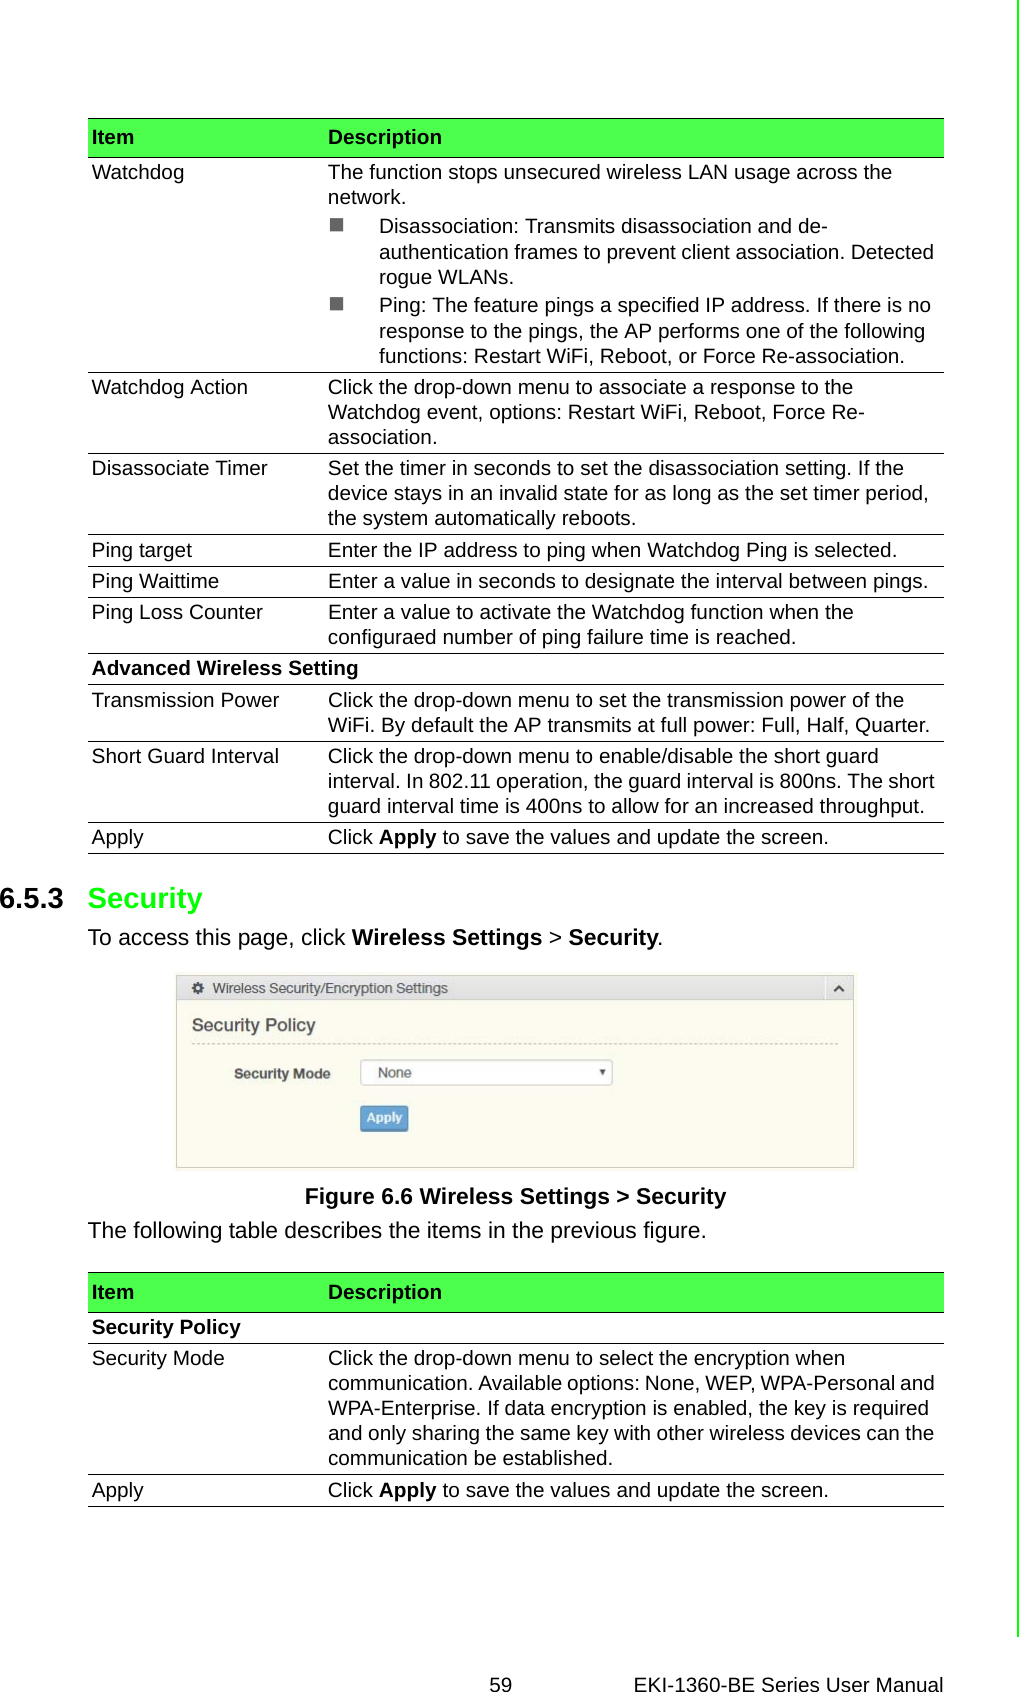 59 EKI-1360-BE Series User Manual 6.5.3 SecurityTo access this page, click Wireless Settings &gt; Security.Figure 6.6 Wireless Settings &gt; SecurityThe following table describes the items in the previous figure.Watchdog The function stops unsecured wireless LAN usage across the network. Disassociation: Transmits disassociation and de-authentication frames to prevent client association. Detected rogue WLANs.Ping: The feature pings a specified IP address. If there is no response to the pings, the AP performs one of the following functions: Restart WiFi, Reboot, or Force Re-association.Watchdog Action Click the drop-down menu to associate a response to the Watchdog event, options: Restart WiFi, Reboot, Force Re-association.Disassociate Timer Set the timer in seconds to set the disassociation setting. If the device stays in an invalid state for as long as the set timer period, the system automatically reboots.Ping target Enter the IP address to ping when Watchdog Ping is selected.Ping Waittime Enter a value in seconds to designate the interval between pings.Ping Loss Counter Enter a value to activate the Watchdog function when the configuraed number of ping failure time is reached.Advanced Wireless SettingTransmission Power Click the drop-down menu to set the transmission power of the WiFi. By default the AP transmits at full power: Full, Half, Quarter.Short Guard Interval Click the drop-down menu to enable/disable the short guard interval. In 802.11 operation, the guard interval is 800ns. The short guard interval time is 400ns to allow for an increased throughput. Apply Click Apply to save the values and update the screen.Item DescriptionItem DescriptionSecurity PolicySecurity Mode Click the drop-down menu to select the encryption when communication. Available options: None, WEP, WPA-Personal and WPA-Enterprise. If data encryption is enabled, the key is required and only sharing the same key with other wireless devices can the communication be established.Apply Click Apply to save the values and update the screen.